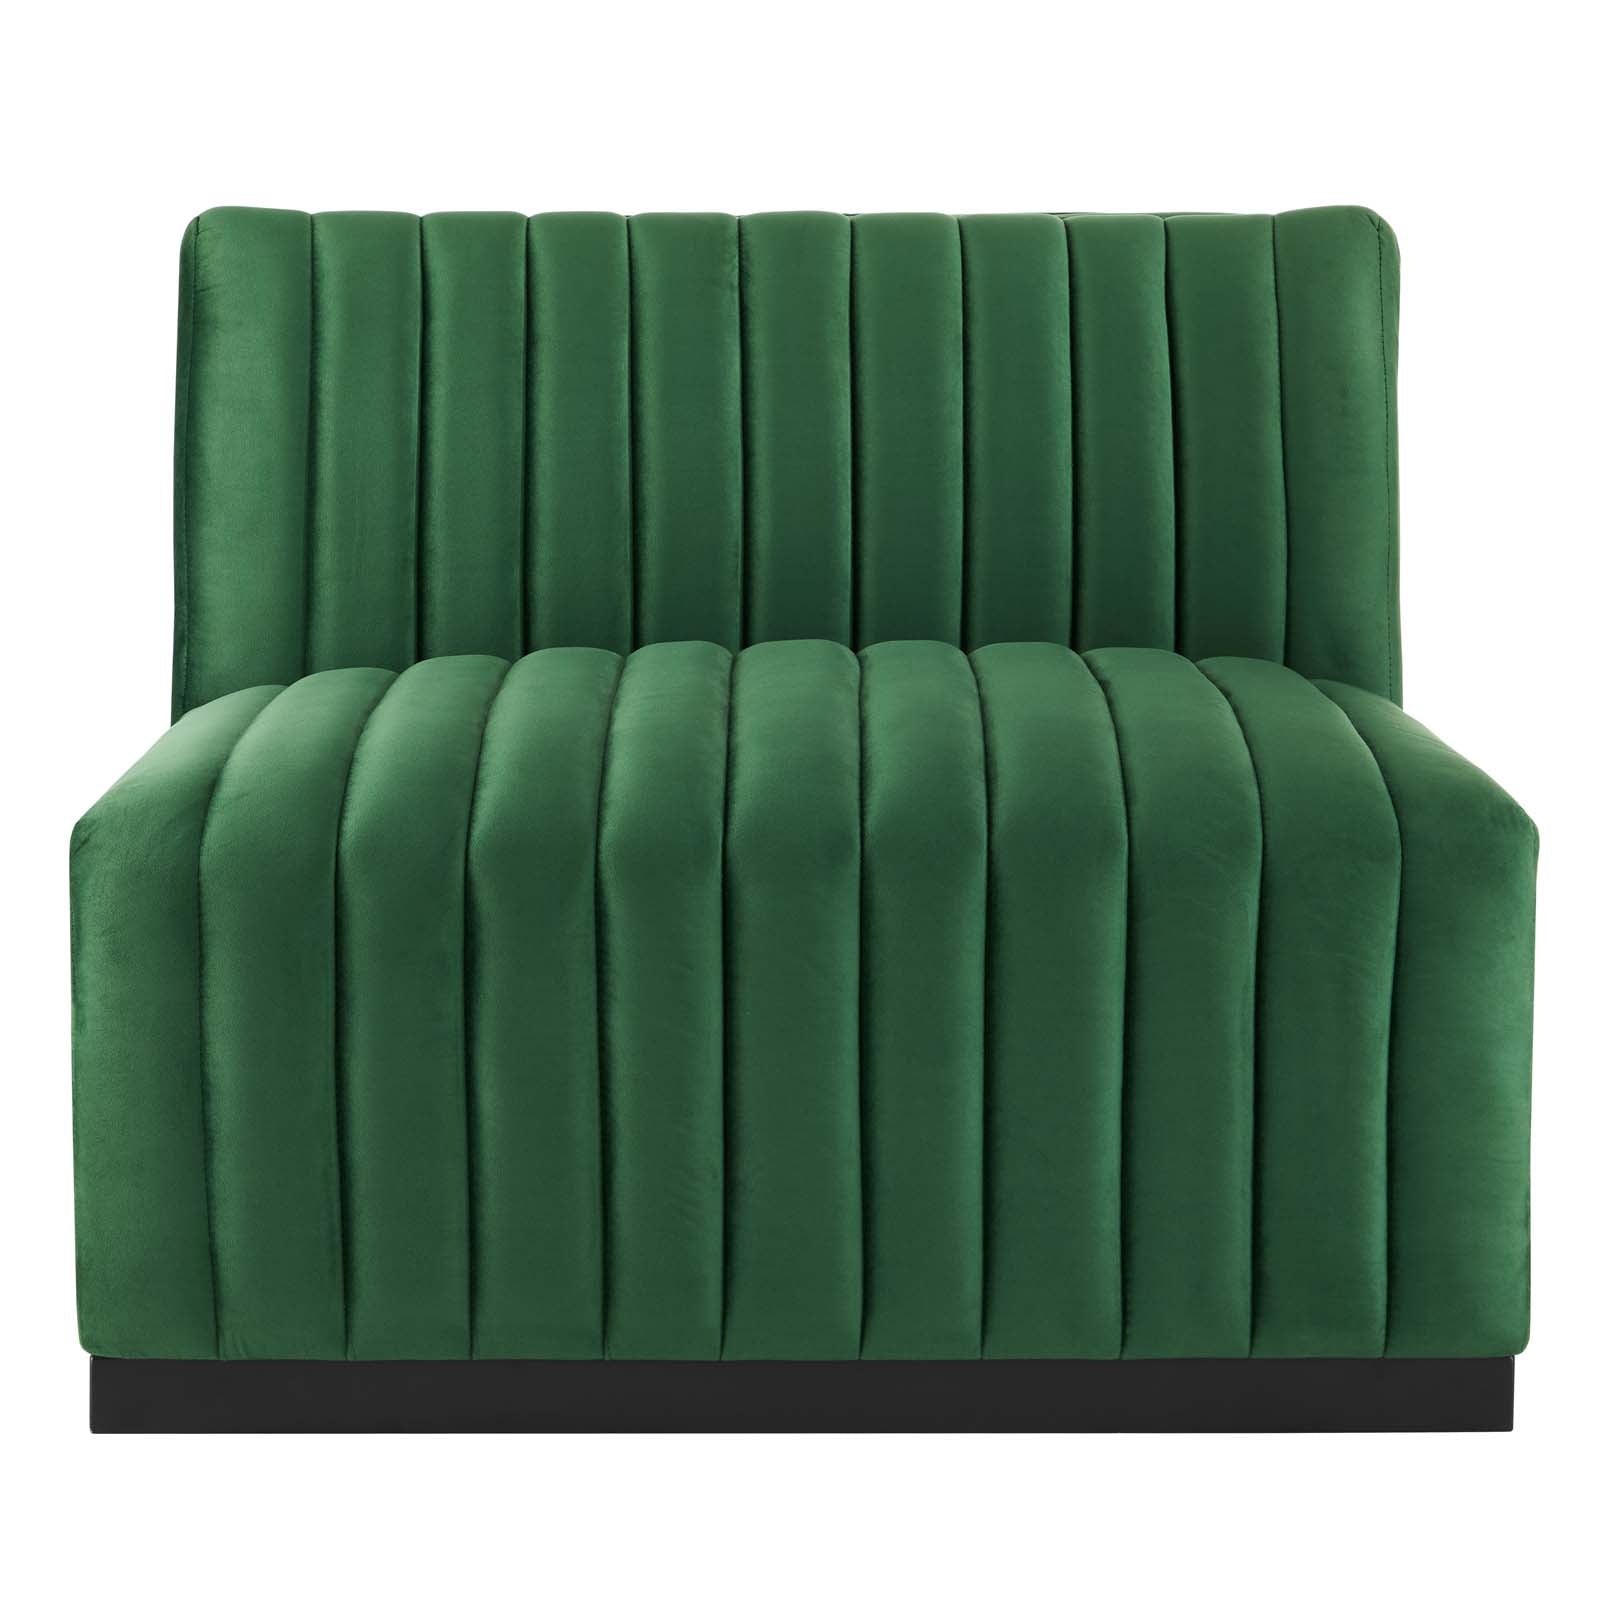 Modway Sectional Sofas - Conjure Channel Tufted Performance Velvet 6-Piece Sectional Black Emerald